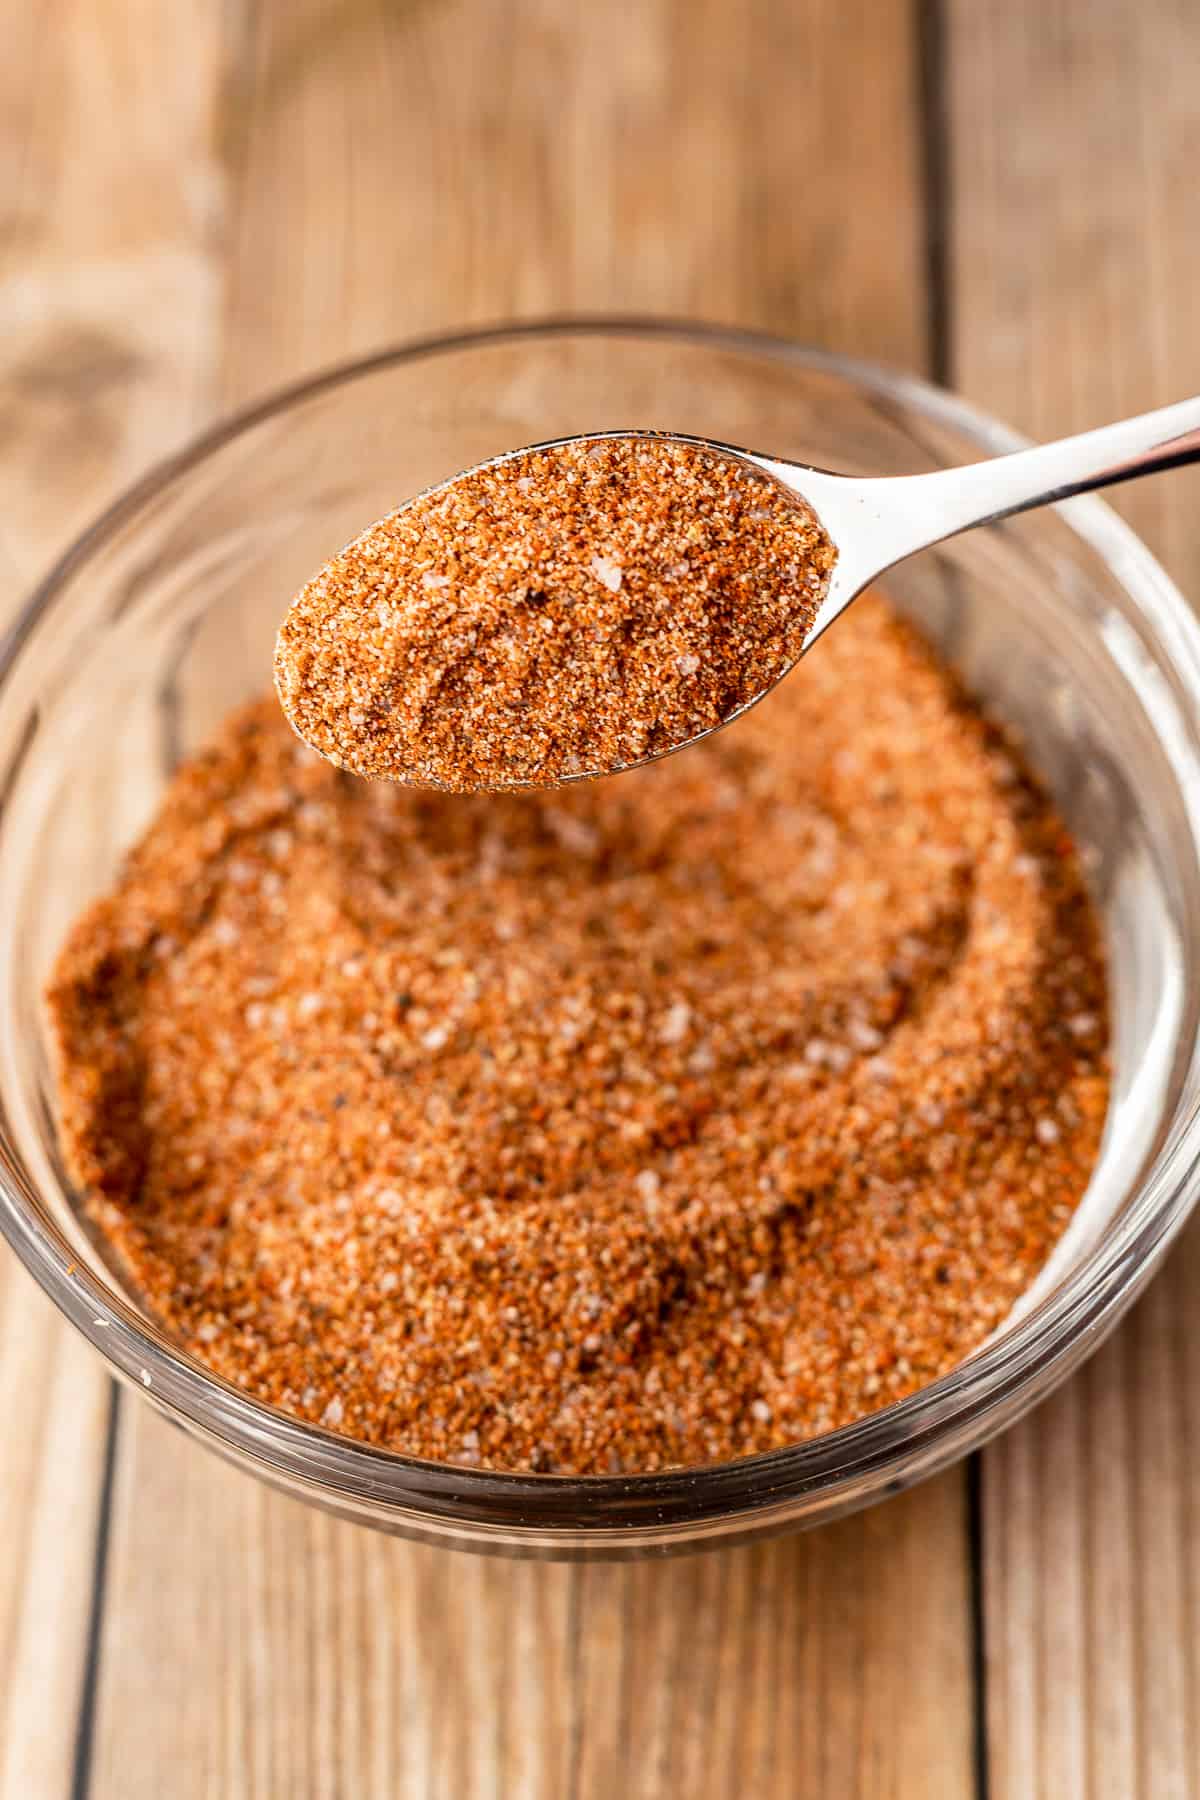 BBQ chicken rub in a small glass bowl with a spoonful of the rub on a silver spoon.